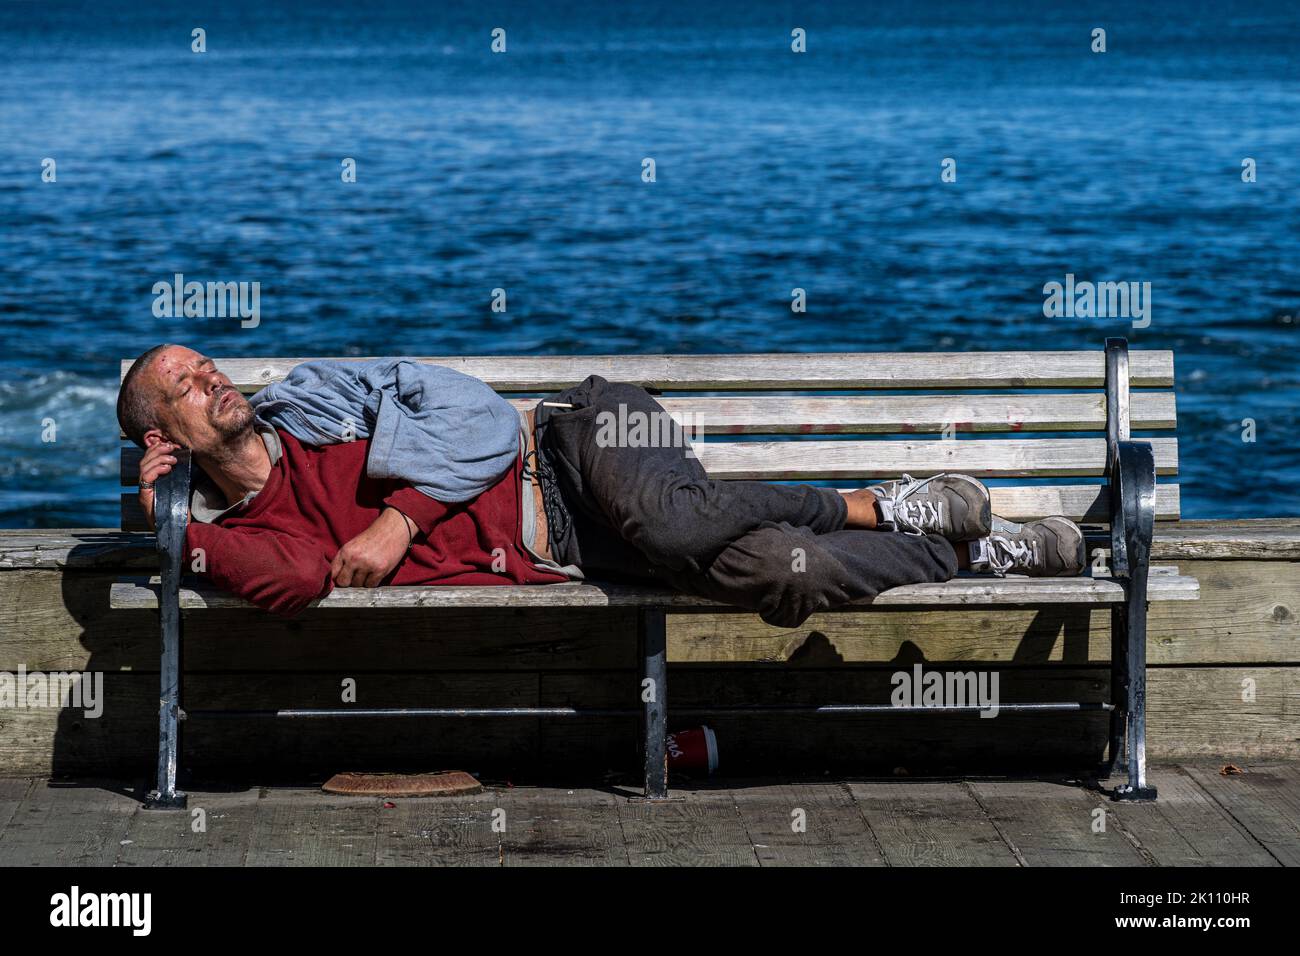 Halifax, Nova Scotia, Canada -- Sept 14, 2022. Photo of a young man sleeping on a waterfront bench on the Halifax Harbour boardwalk. Stock Photo